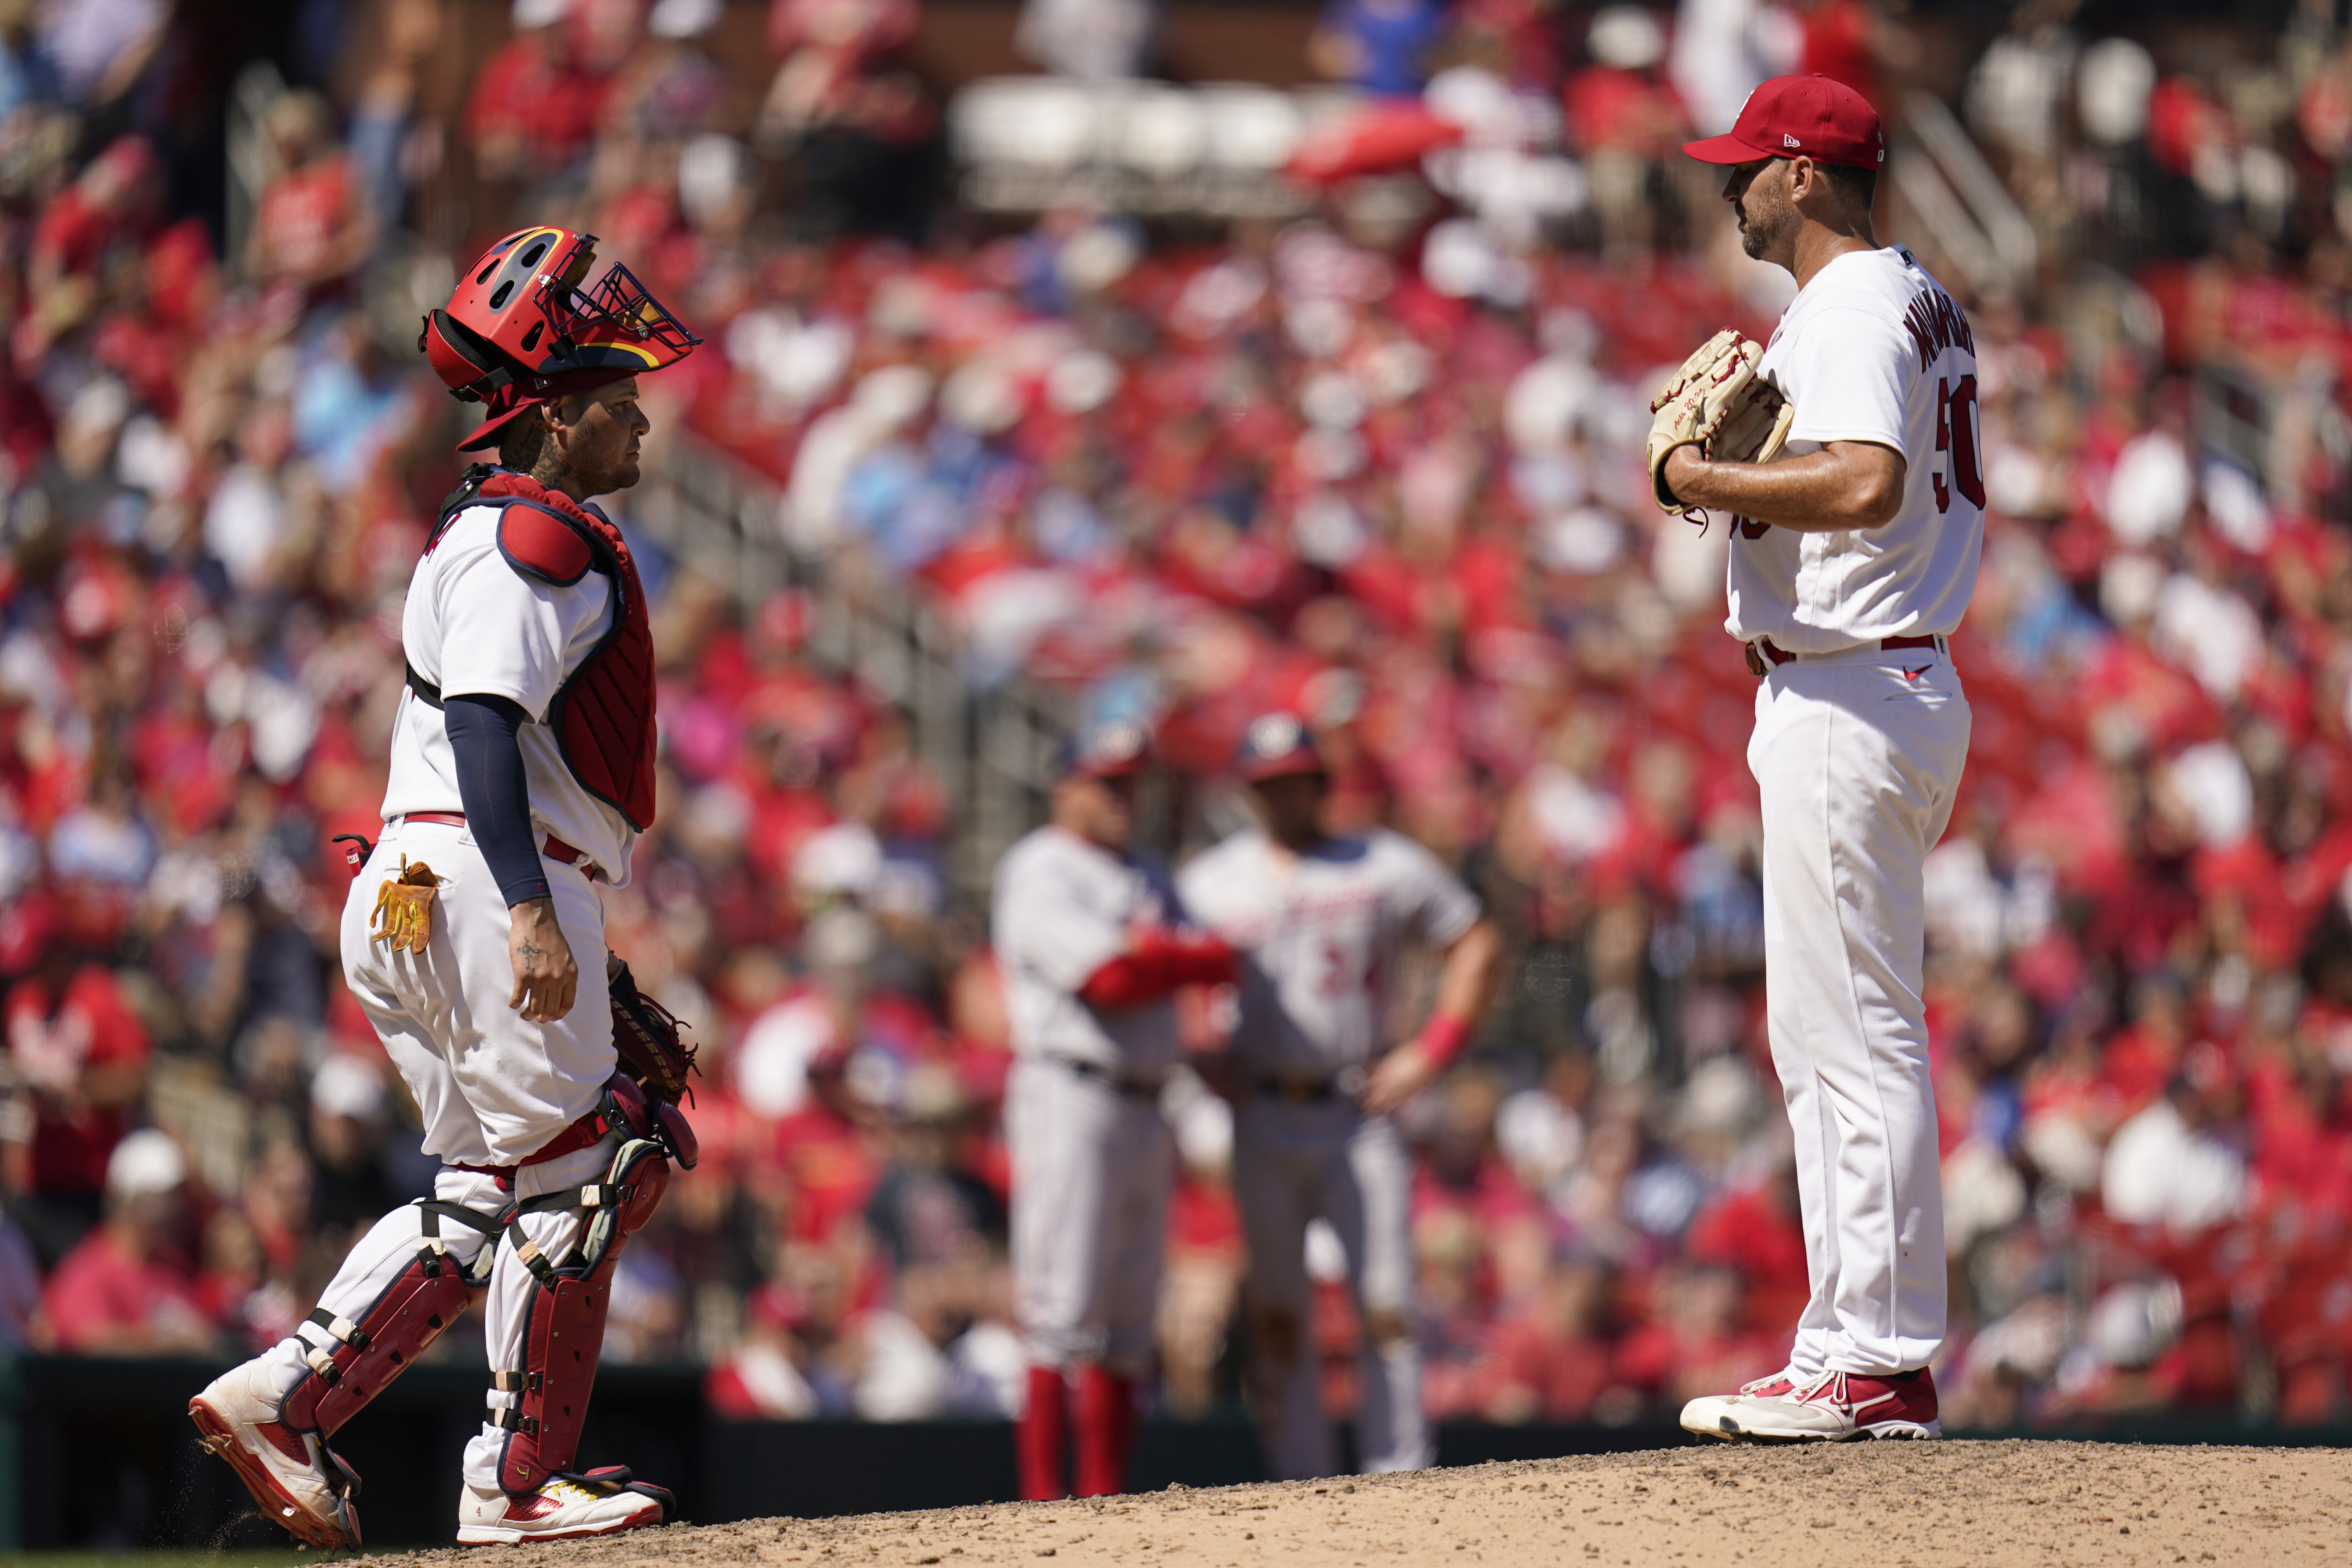 Wainwright talks about going for MLB battery record with Molina